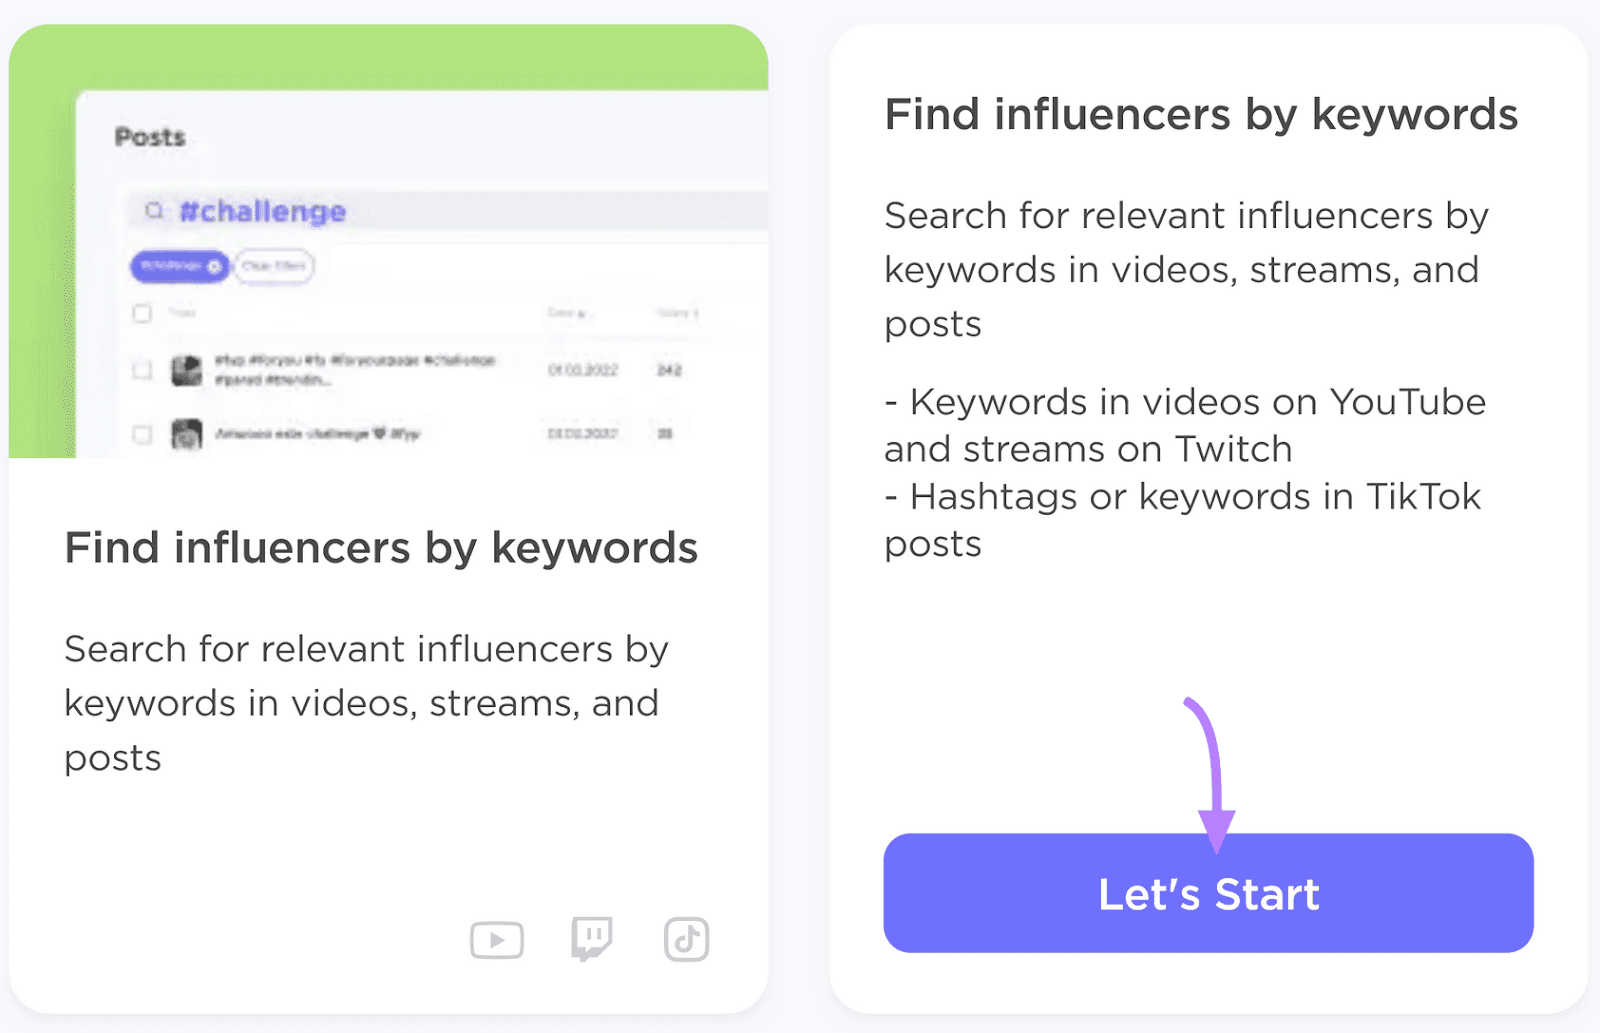 Two-panel image with instructions on finding influencers by keyword and a blue "Let's Start" button.